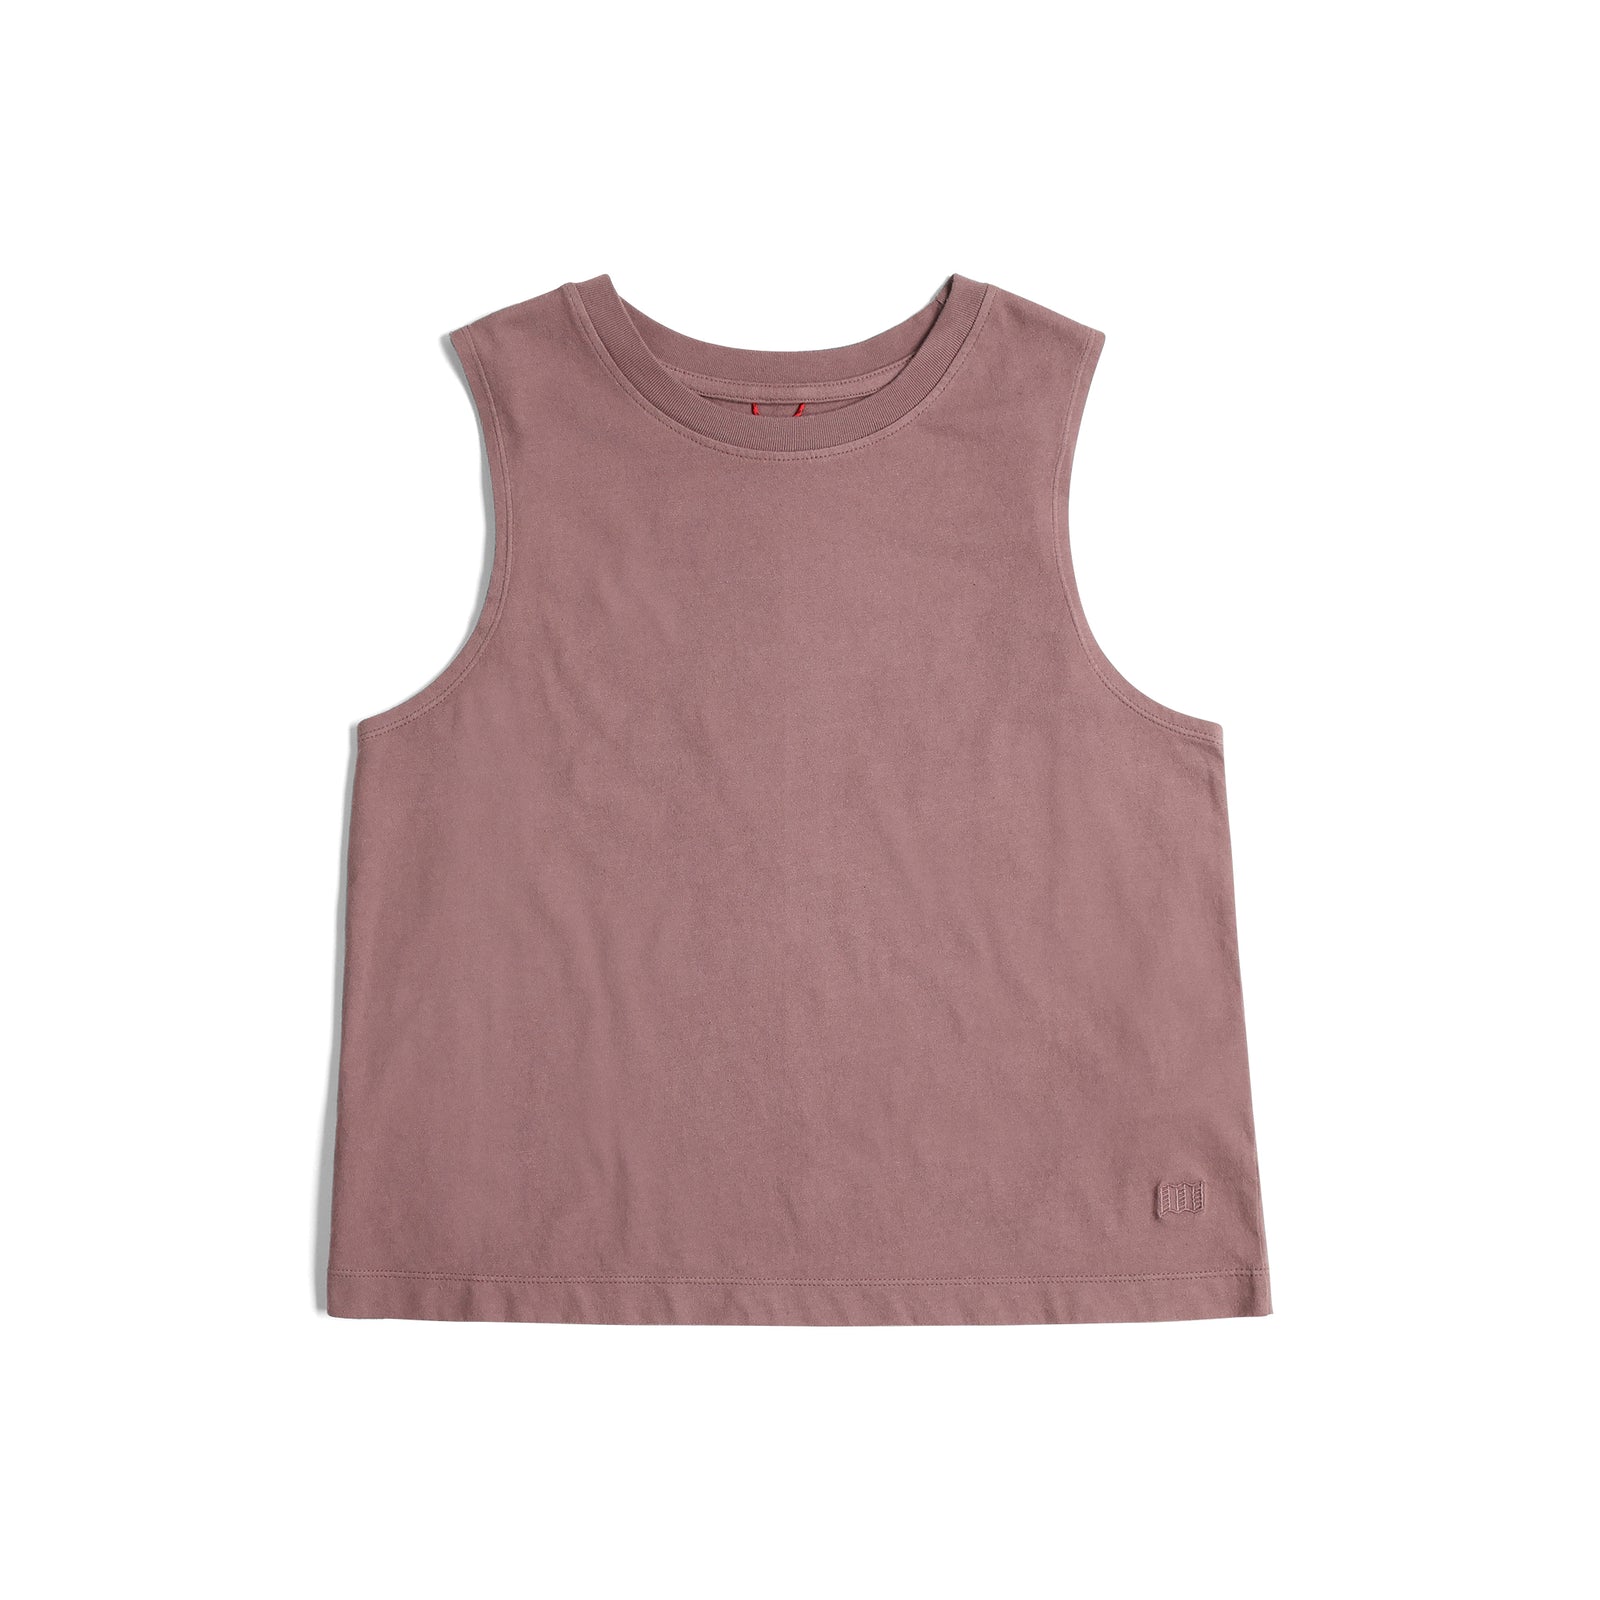 Front View of Topo Designs Dirt Tank - Women's in "Peppercorn"